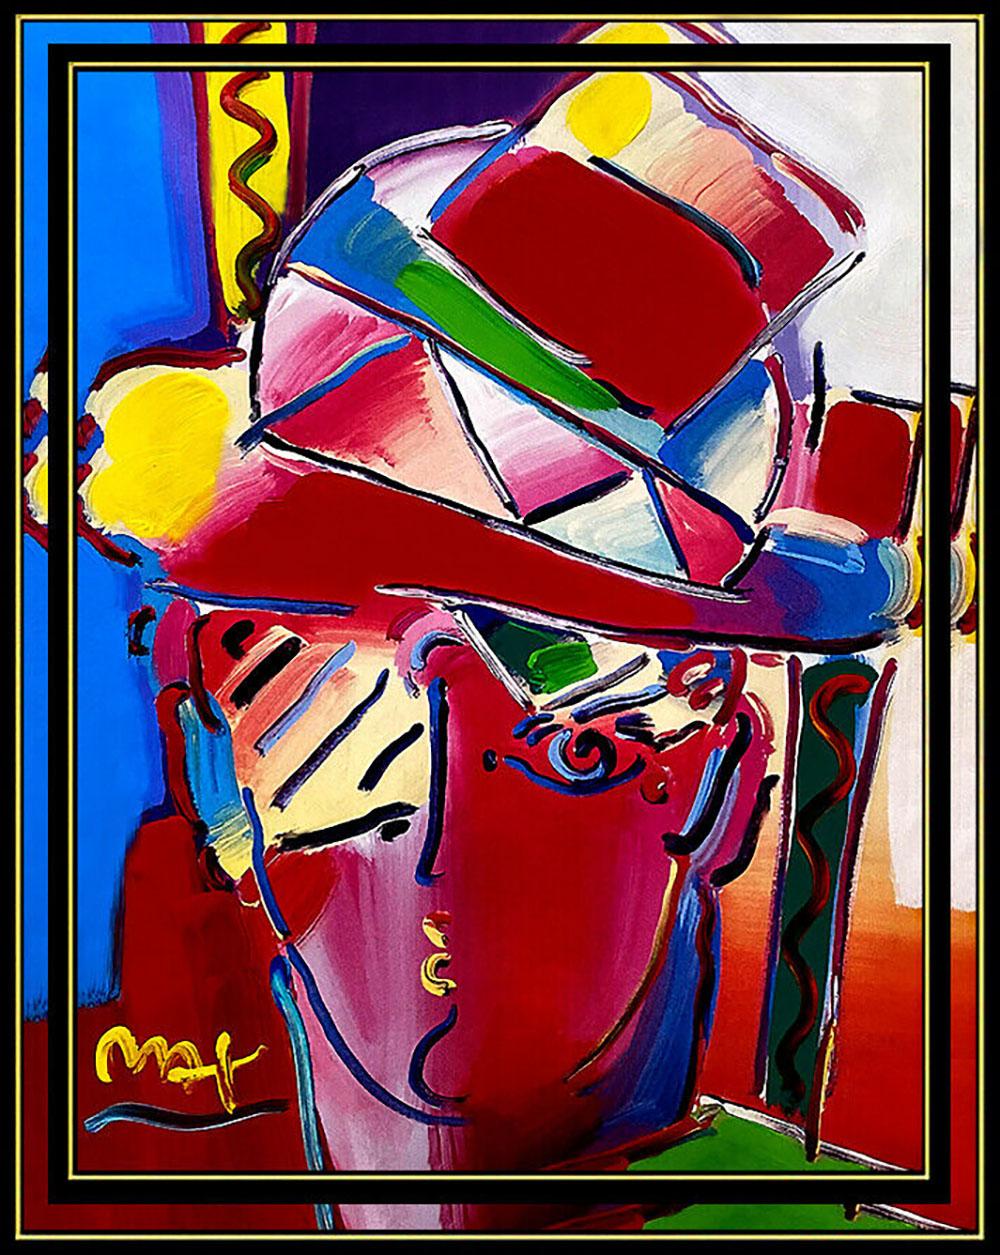 PETER MAX Original Signed PAINTING ZERO PRISM Pop ART Acrylic Oil Iconic MAN - Painting by Peter Max